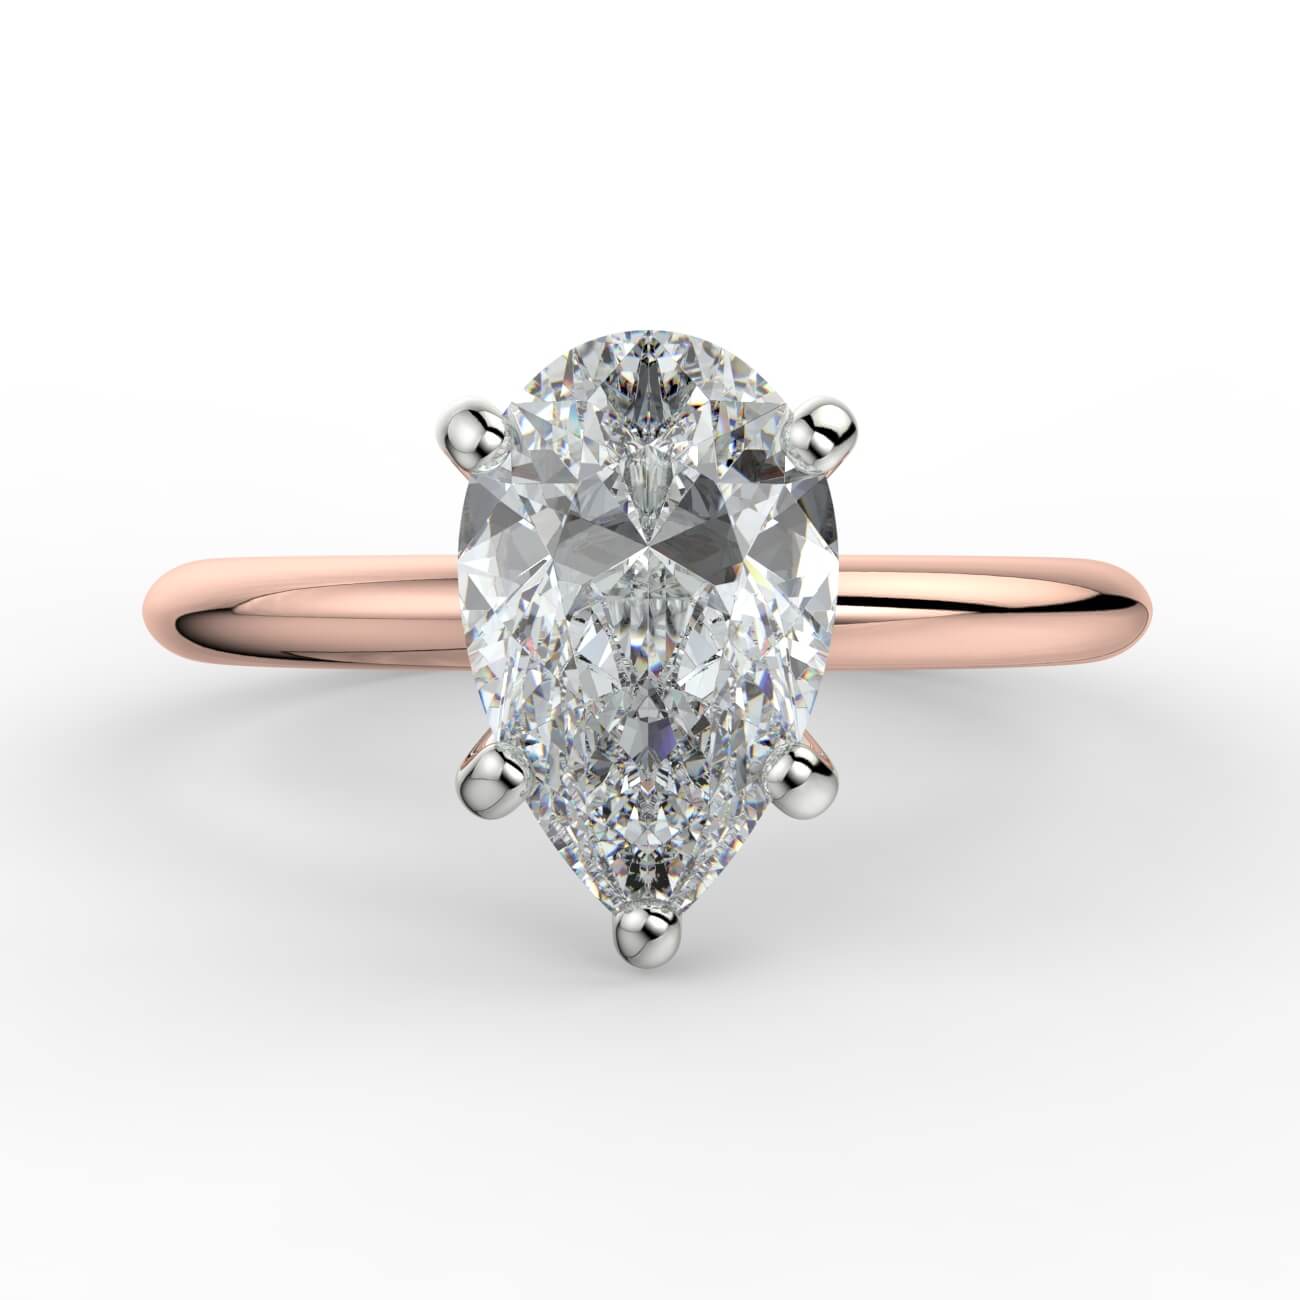 Solitaire pear shape diamond engagement ring in rose and white gold – Australian Diamond Network